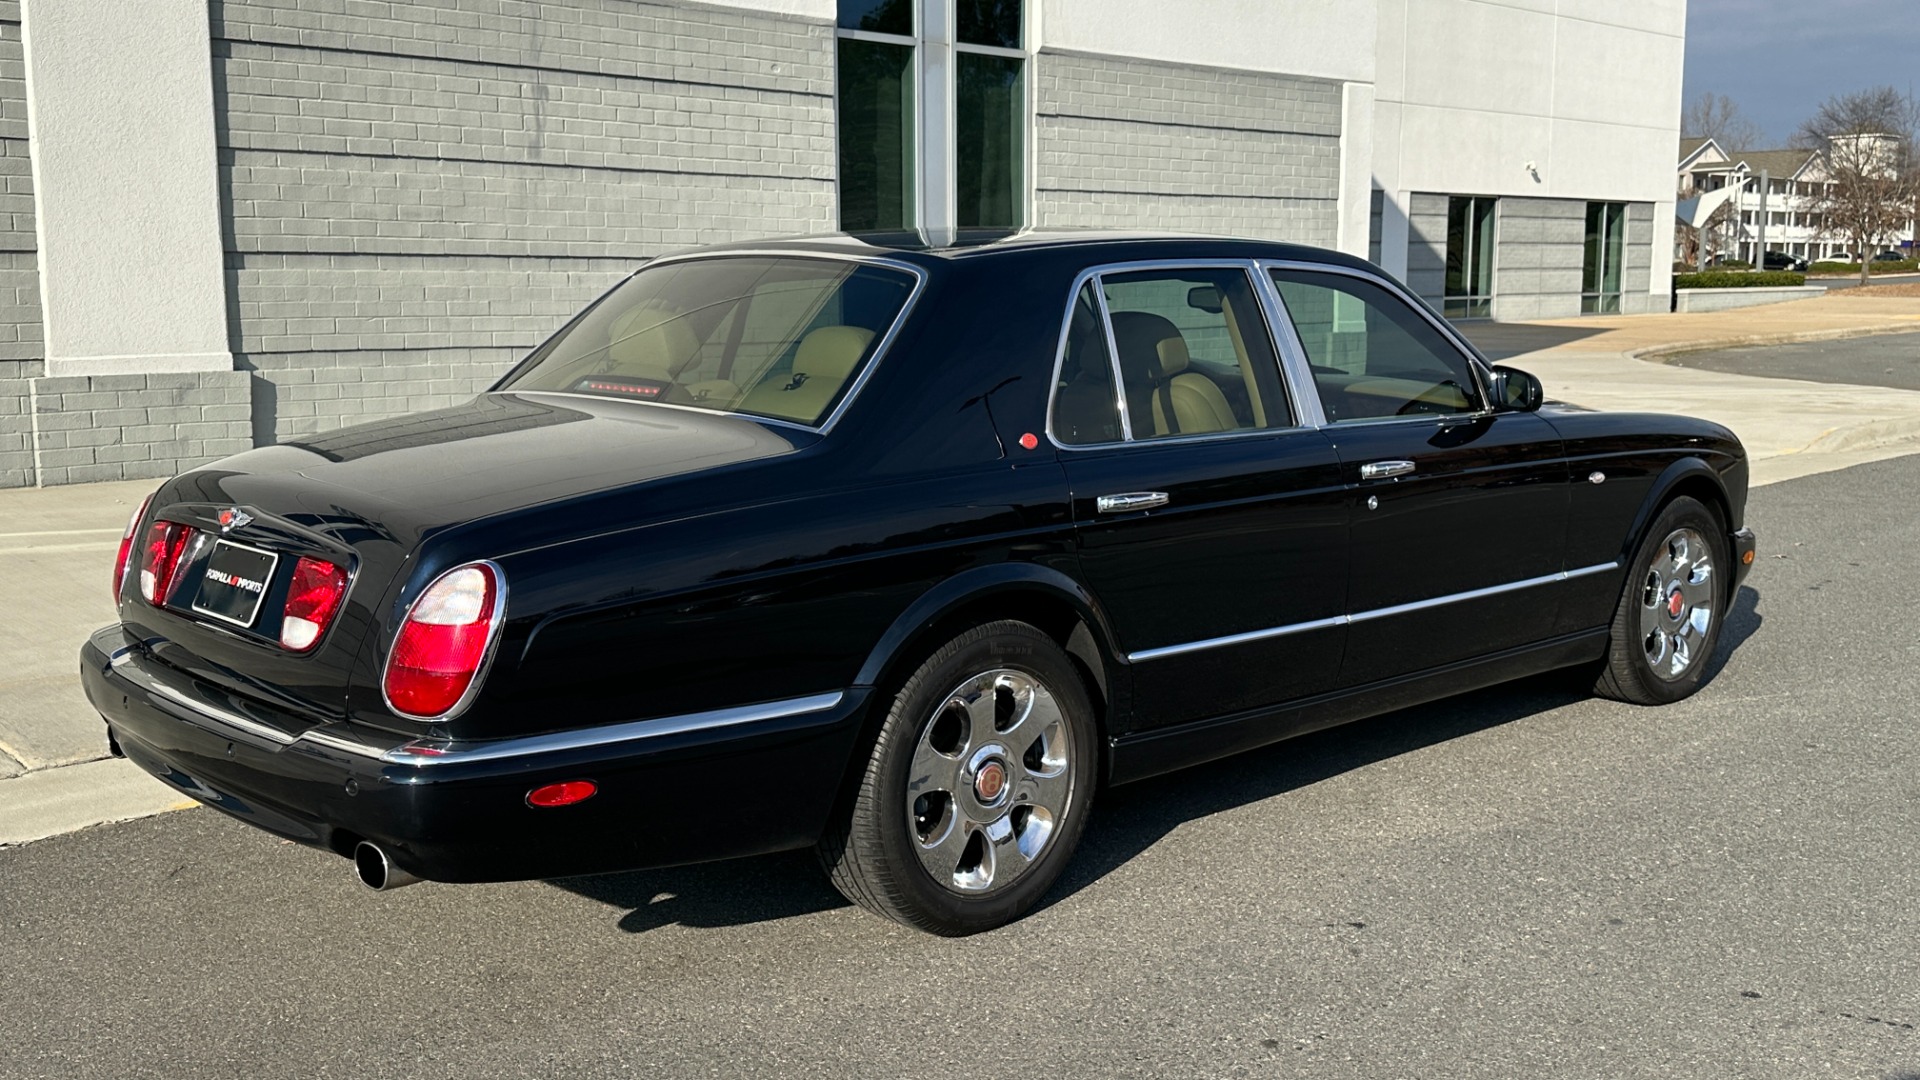 Used 2001 Bentley ARNAGE RED LABEL 6.75L V8 / TURBO / FULL LEATHER / WOOD TRIM / HEATED SEATS / SUNR for sale Sold at Formula Imports in Charlotte NC 28227 7